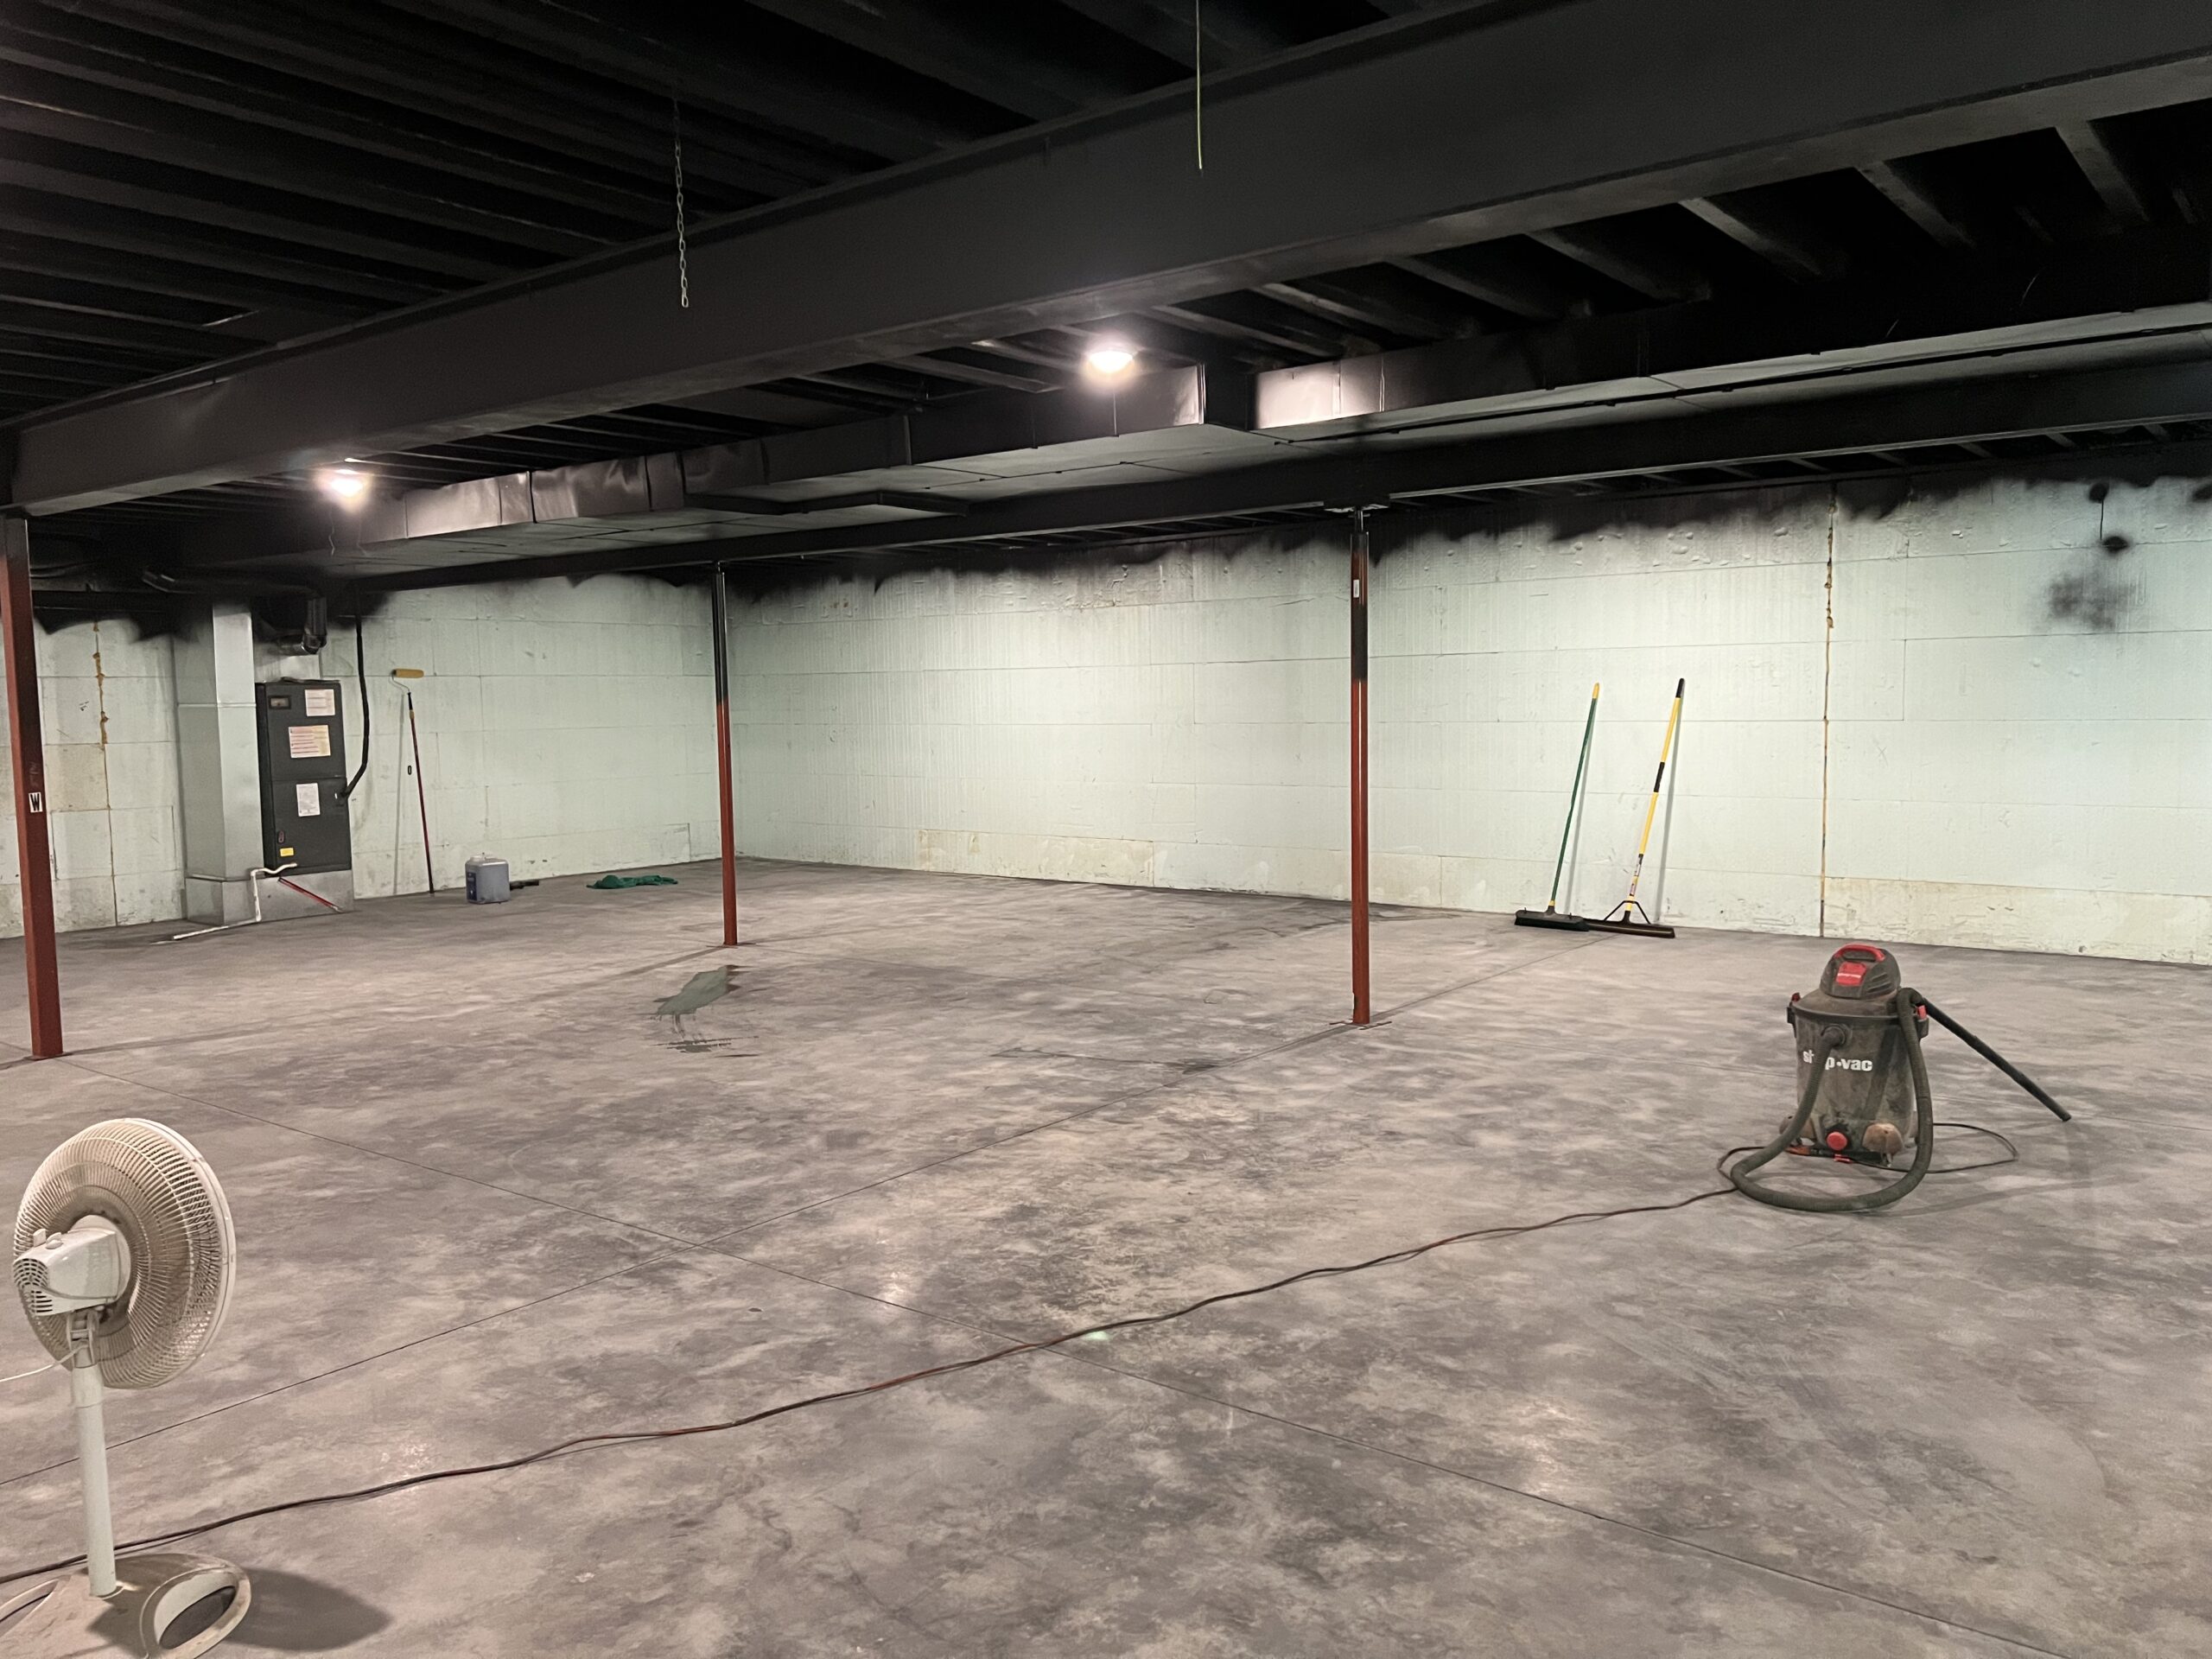 An image showing a concrete basement floor prepped for AquaTint application, having undergone power washing, stripping, and sanding